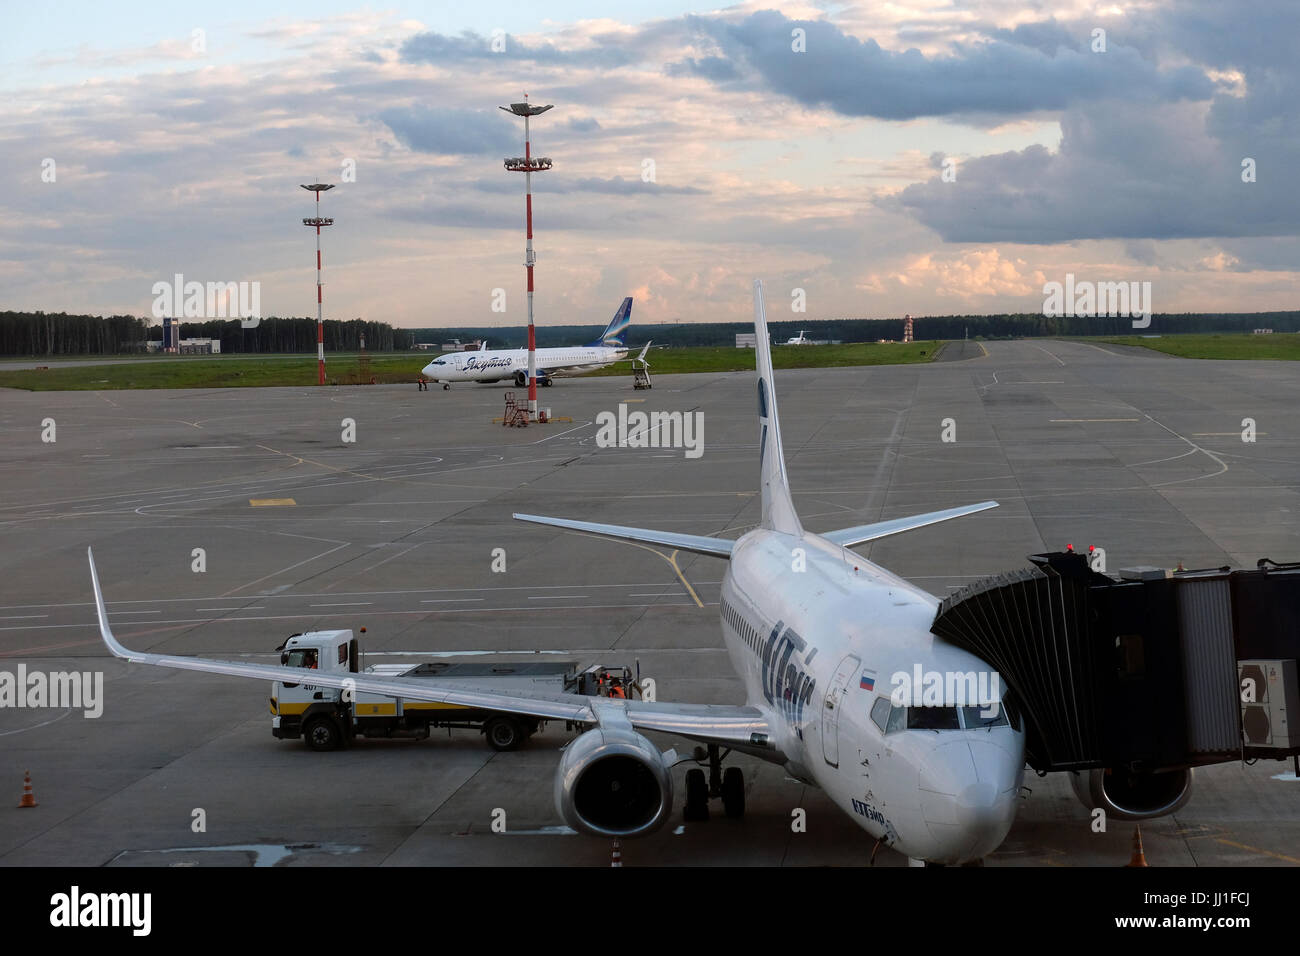 Airplanes at the tarmac of Yuzhno-Sakhalinsk Airport also called Khomutovo in the city of Yuzhno-Sakhalinsk, in the island of Sakhalin, in the Pacific Ocean. Russia Stock Photo